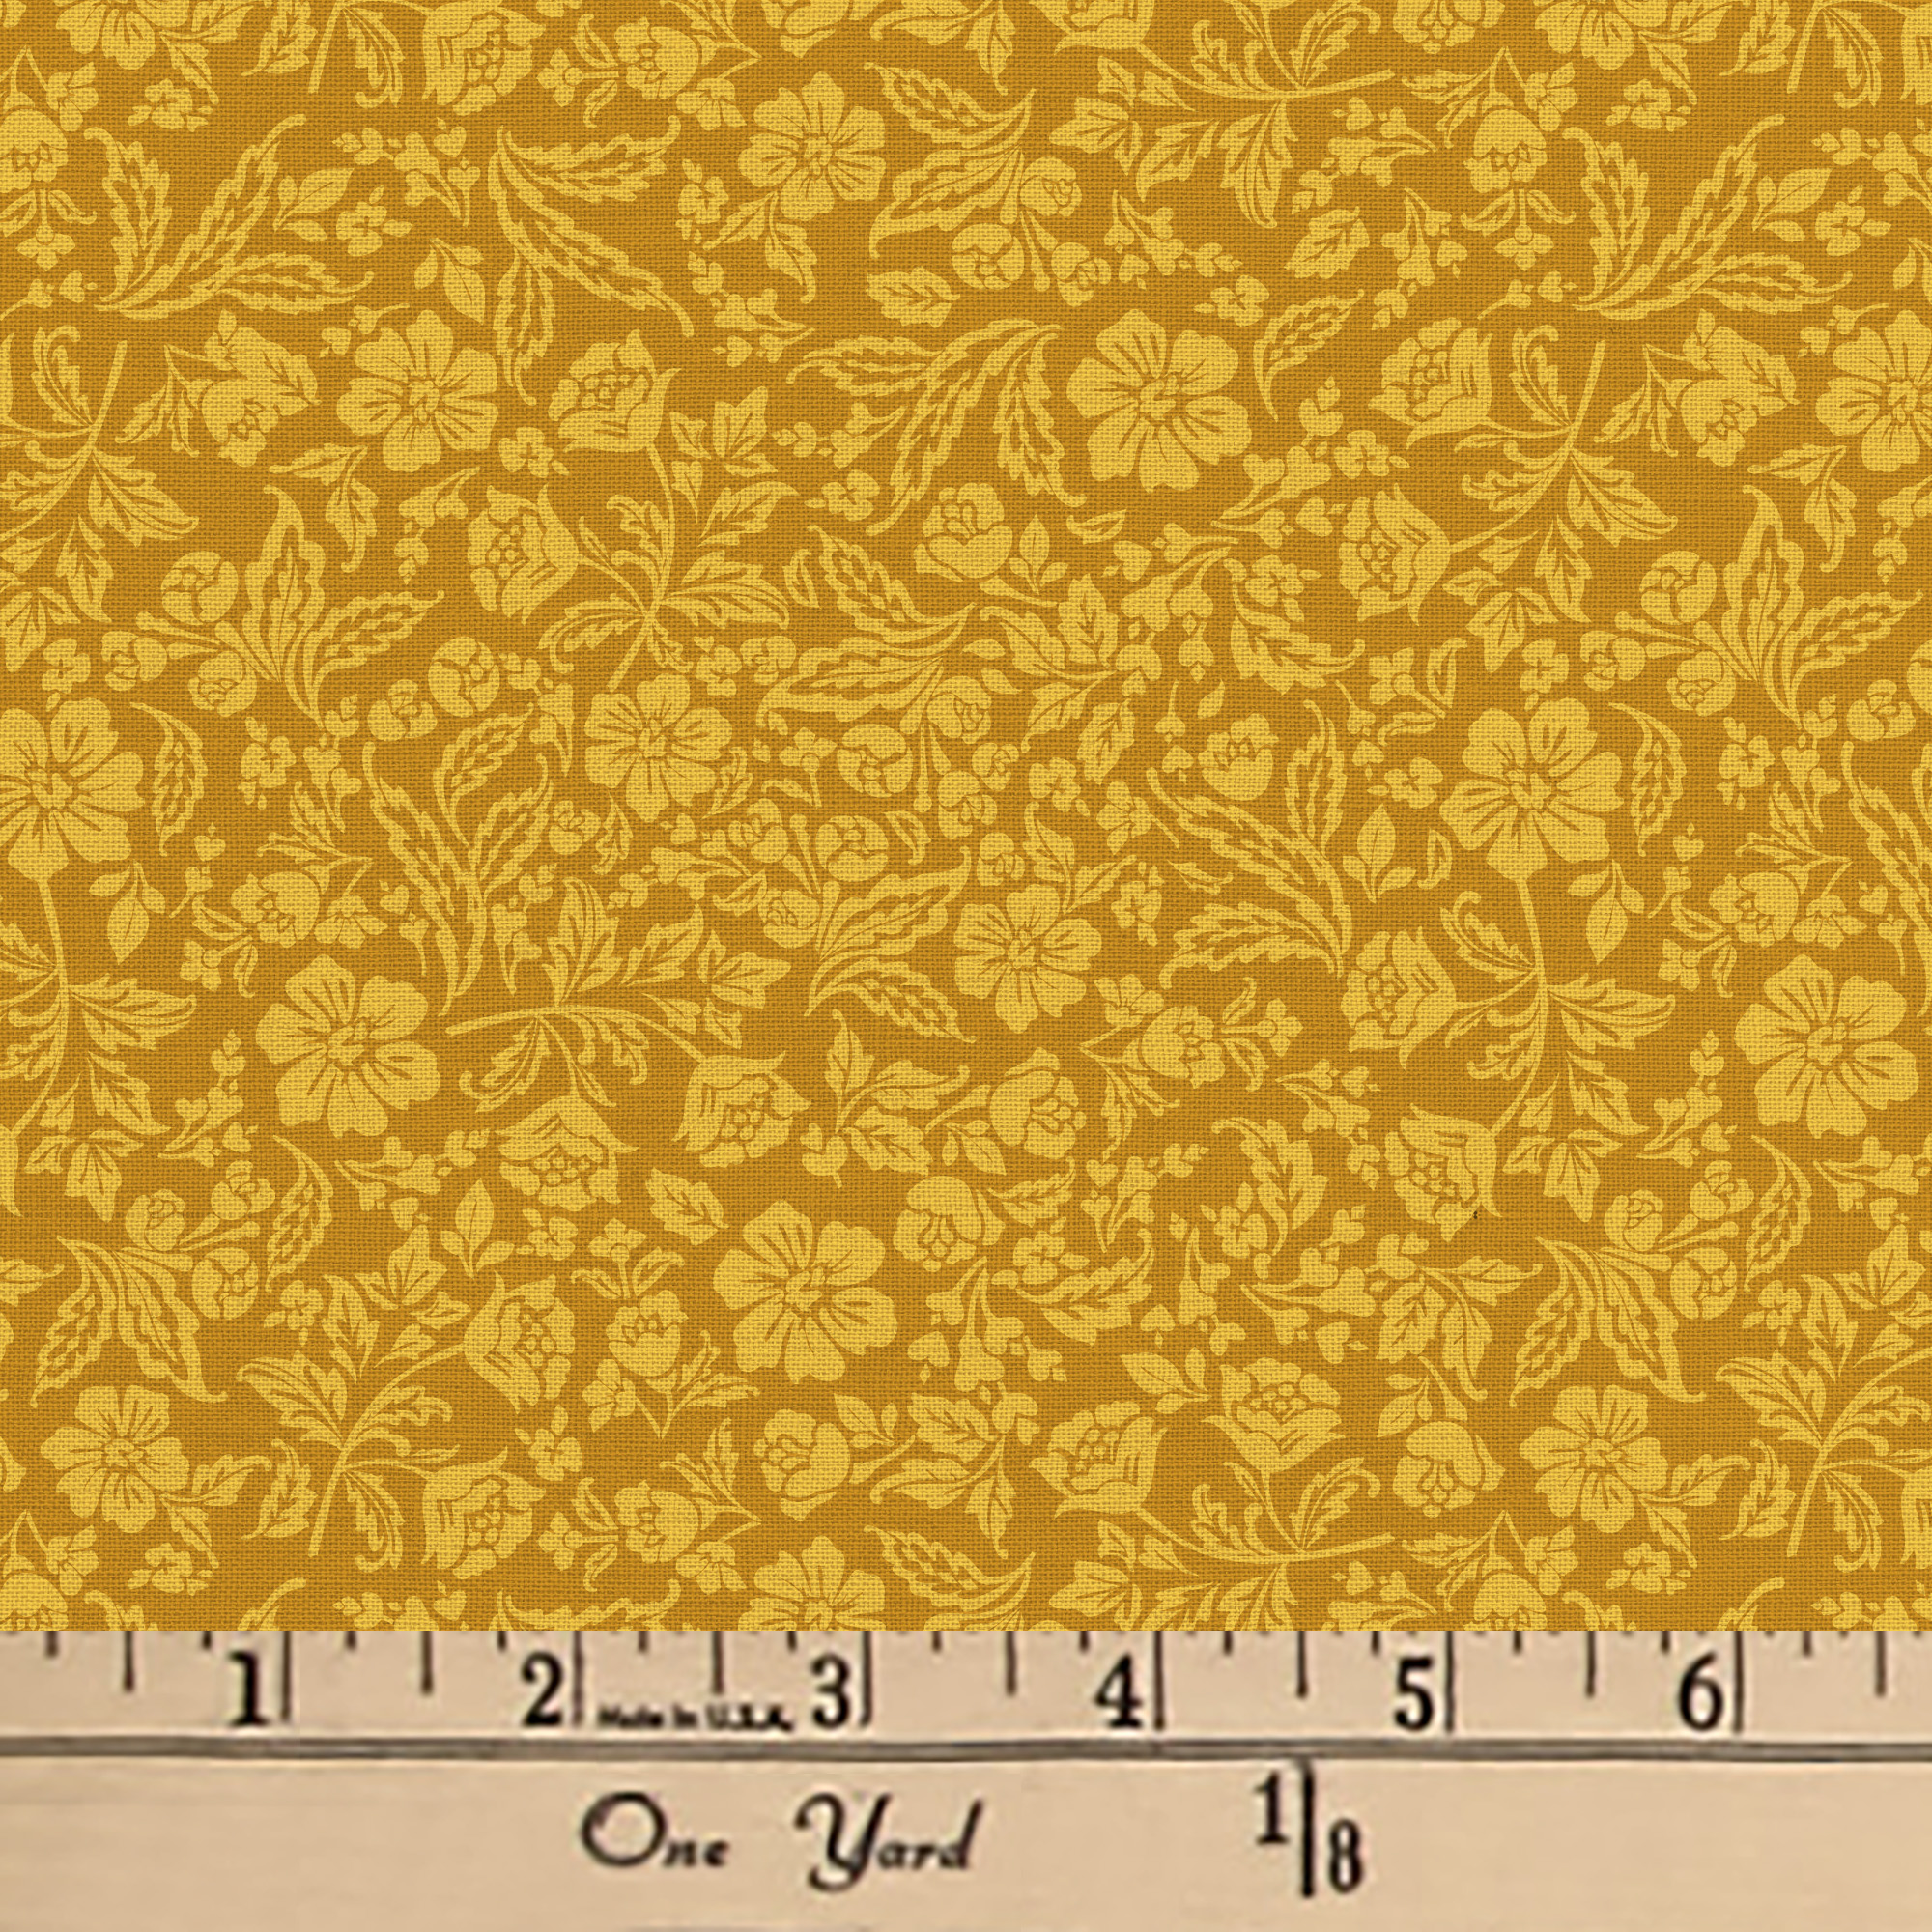 Waverly Inspirations 44" Cotton Paris Floral Fabric by the Yard, Marigold - image 2 of 2